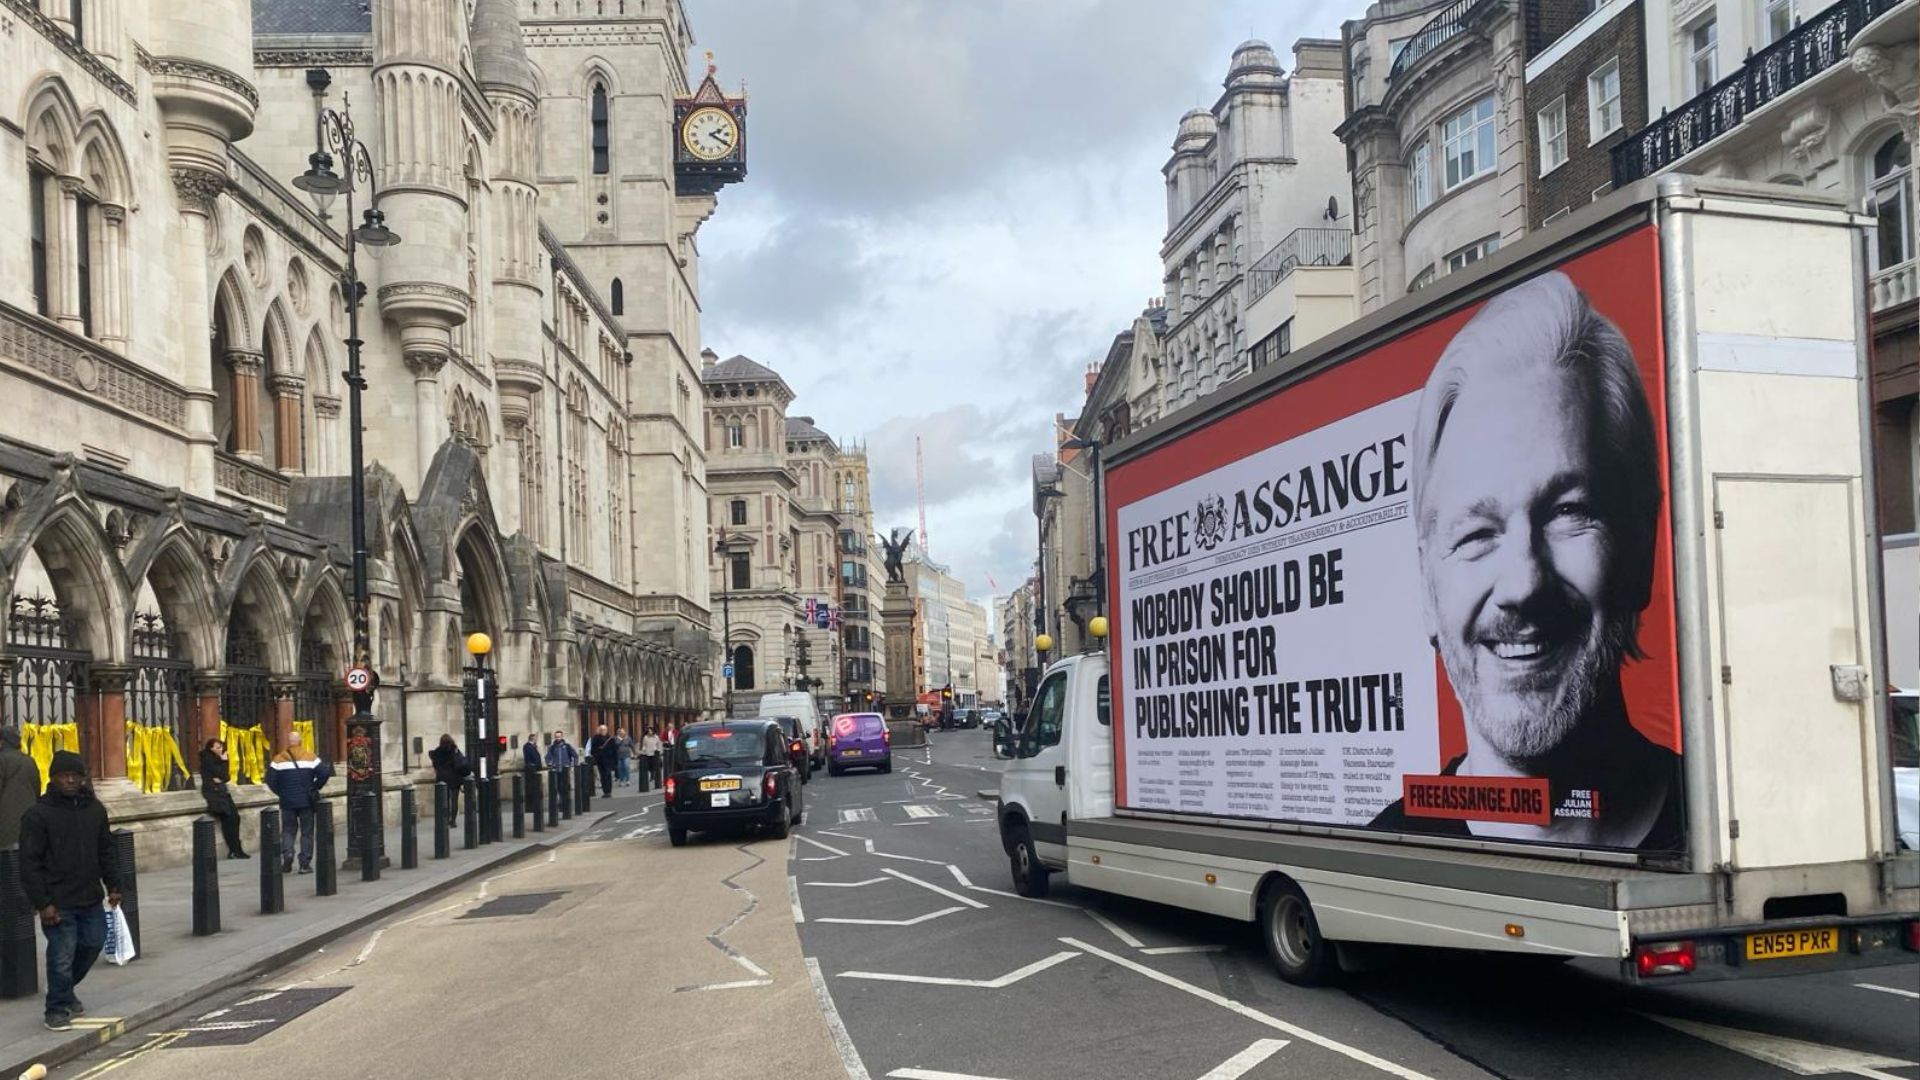 A mobile billboard commissioned by Assange supporters. /Iolo ap Dafydd/CGTN